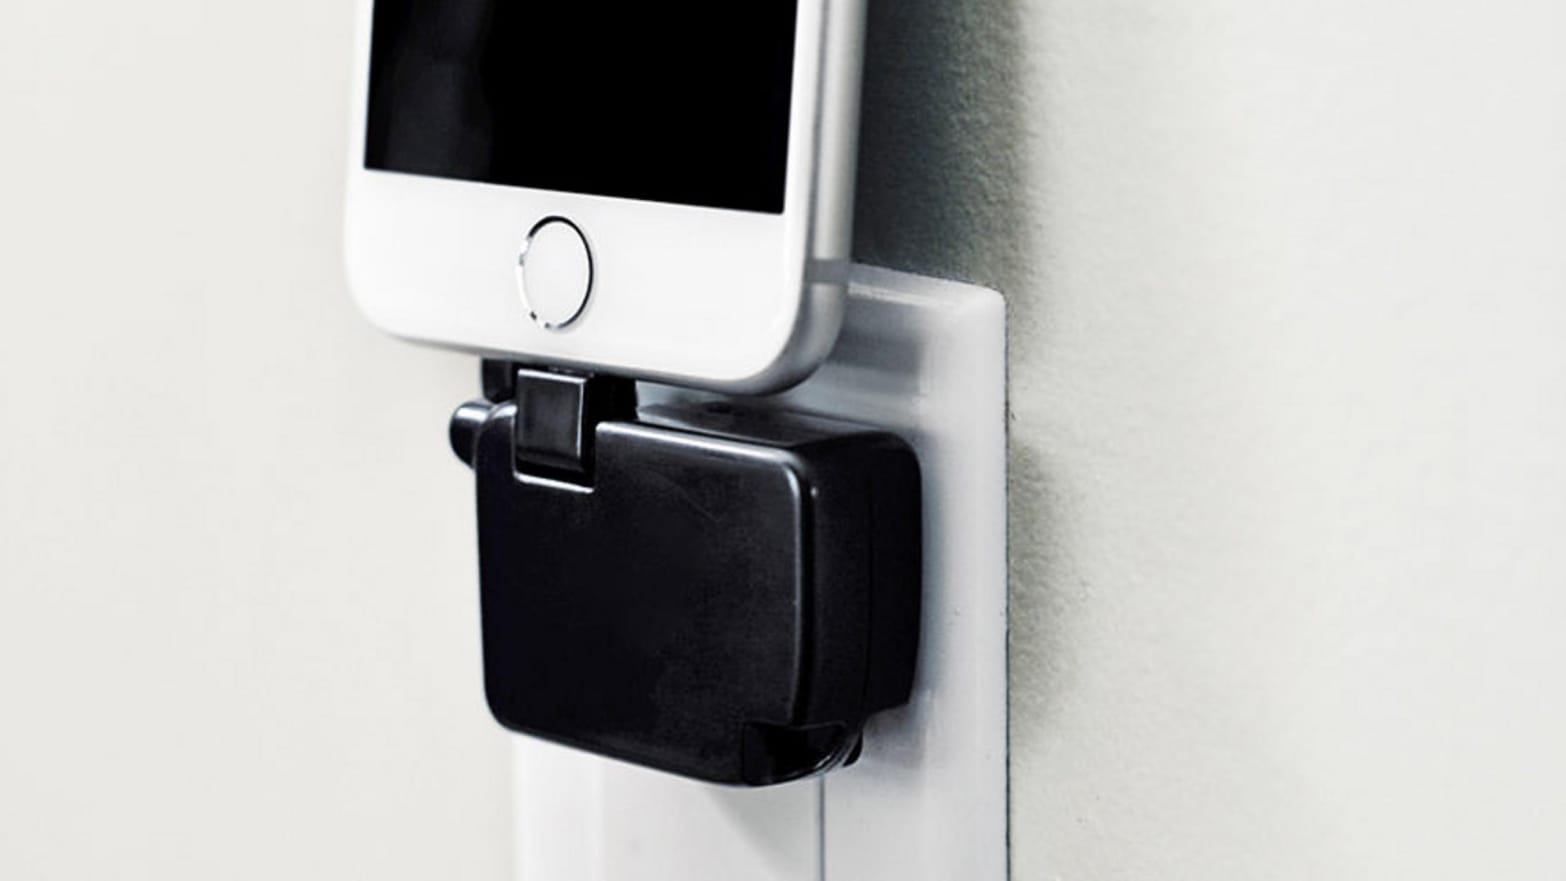 The Nipper - The world's smallest phone charger by Design on